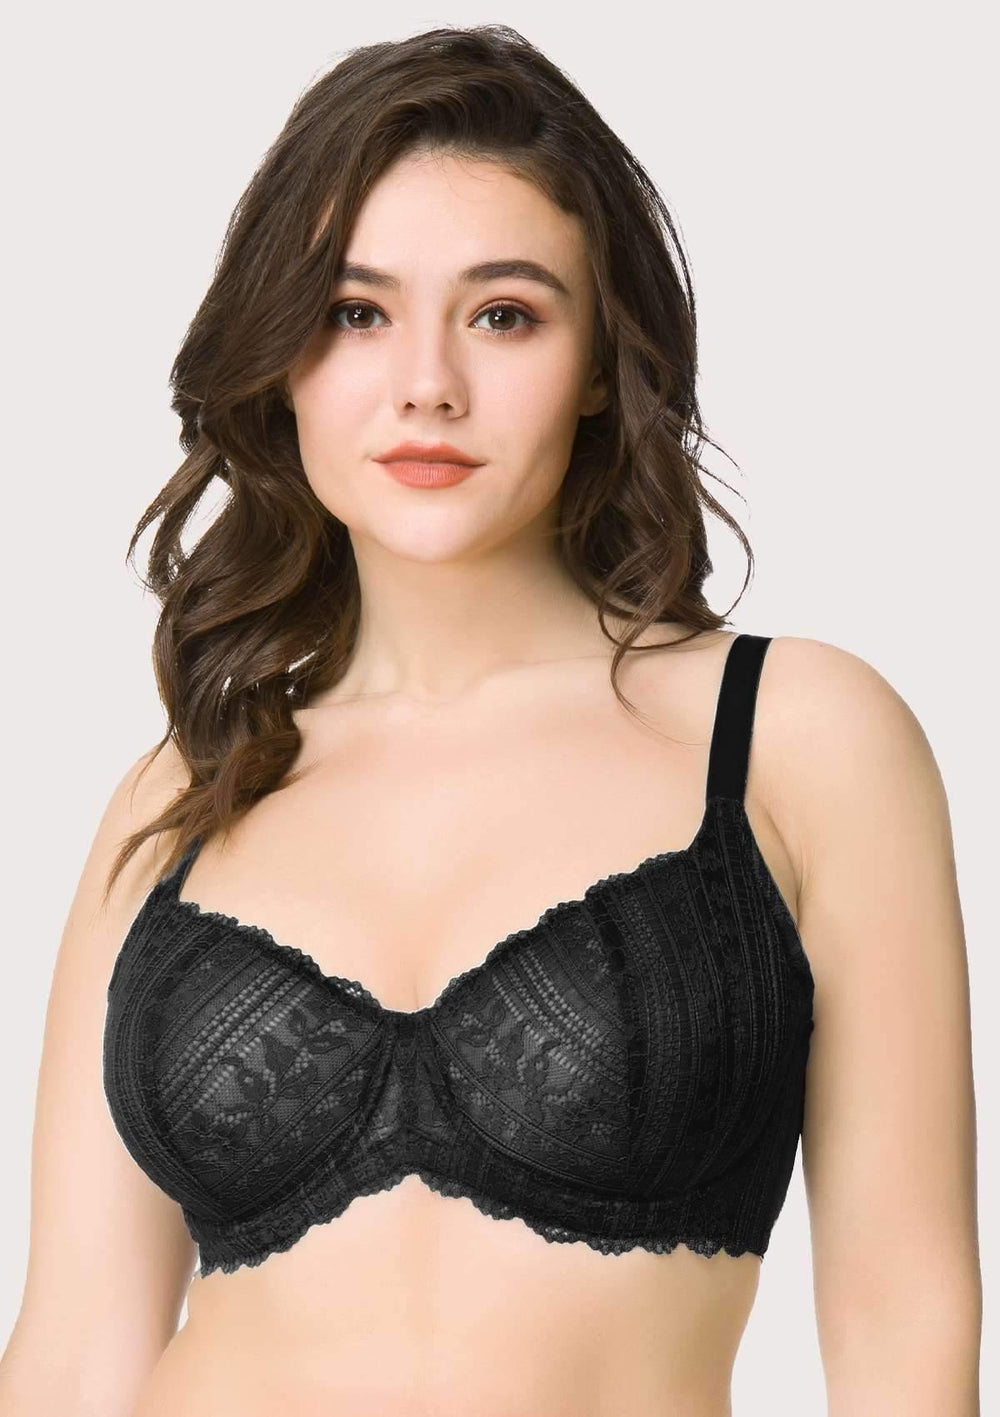  XMSM Women's Sexy Widening High Wings Bra Large Size